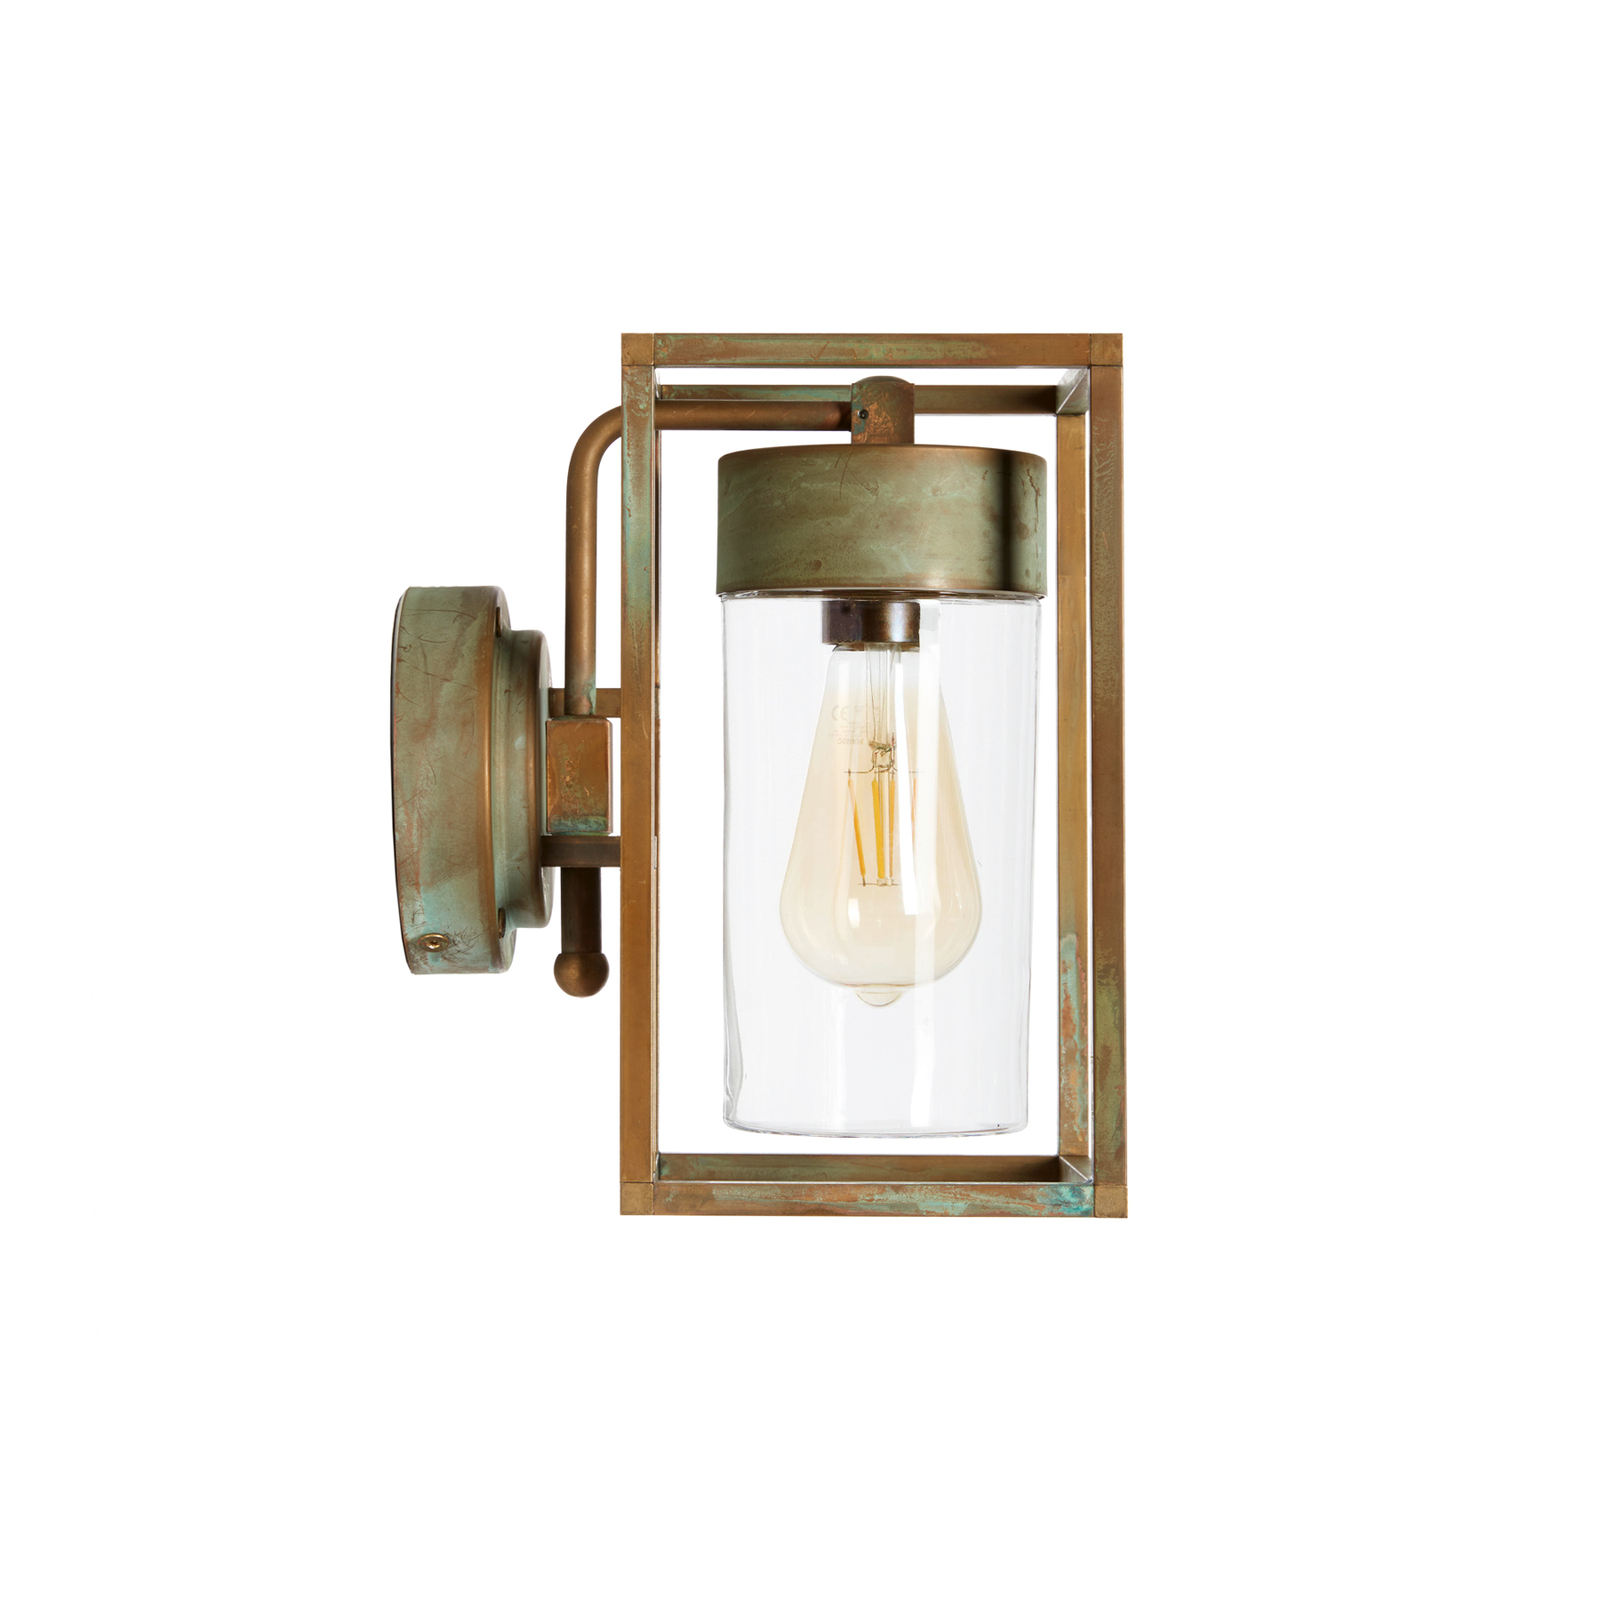 Cubic 3372 outdoor wall lamp antique brass/clear